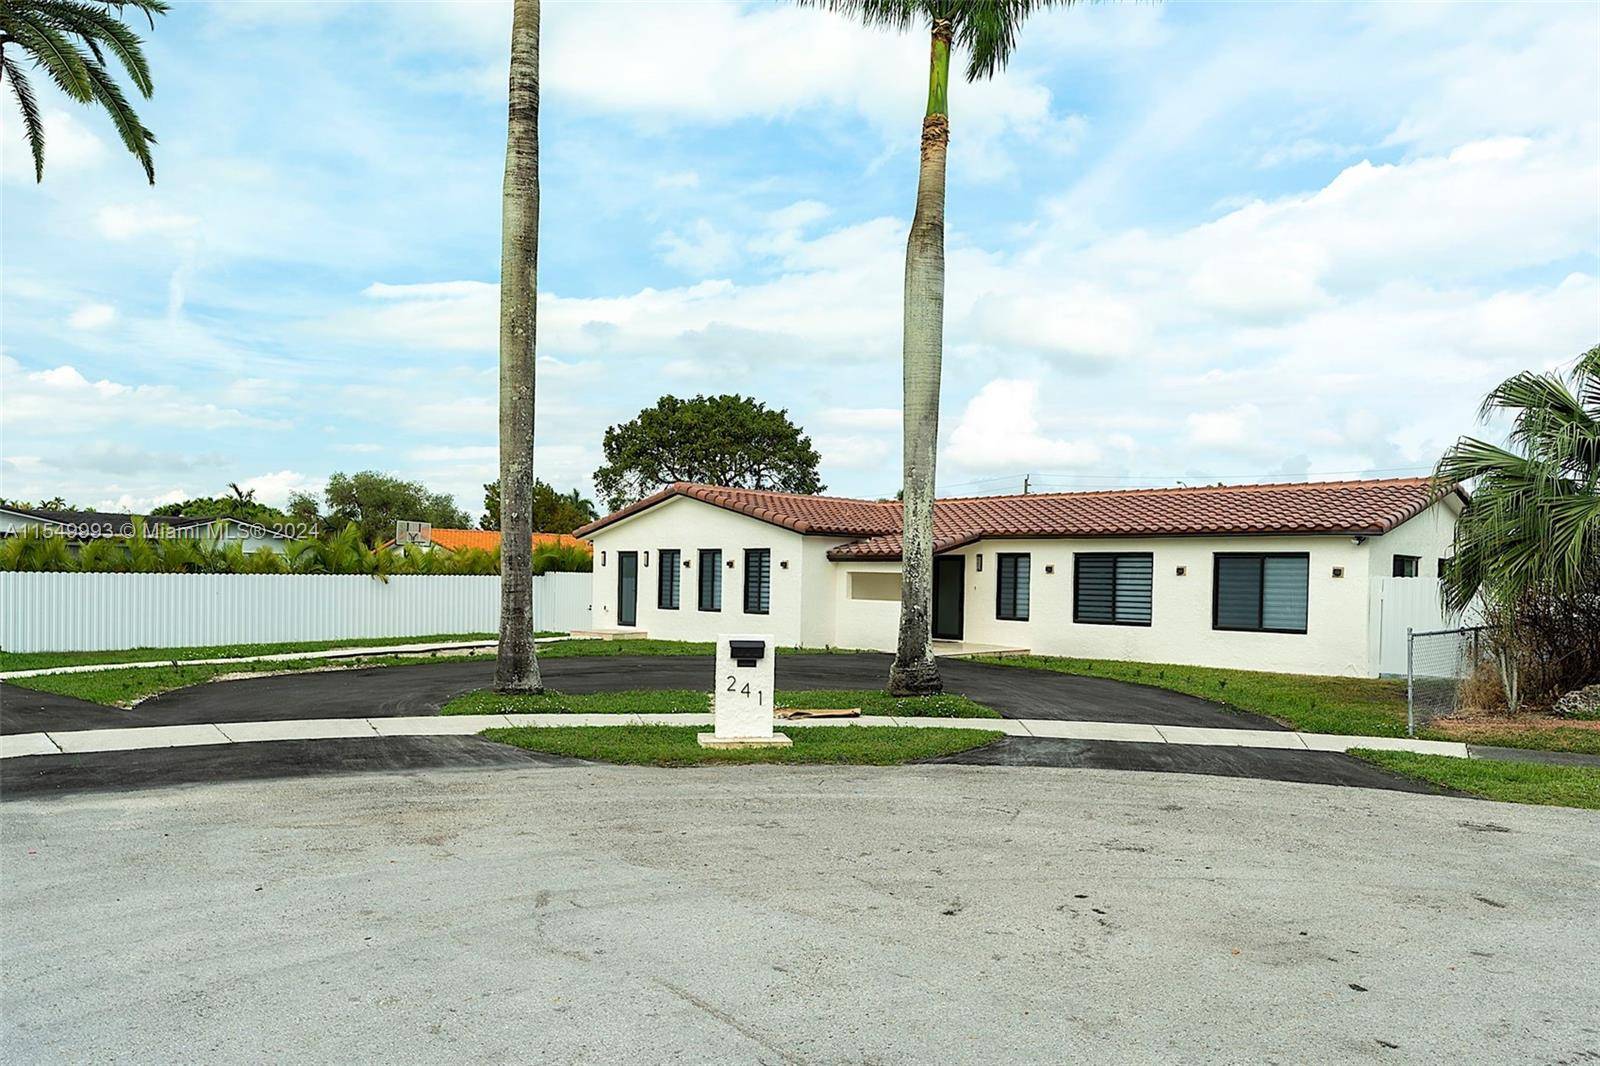 Excellent opportunity to rent a completely remodeled home next to FIU's main campus.